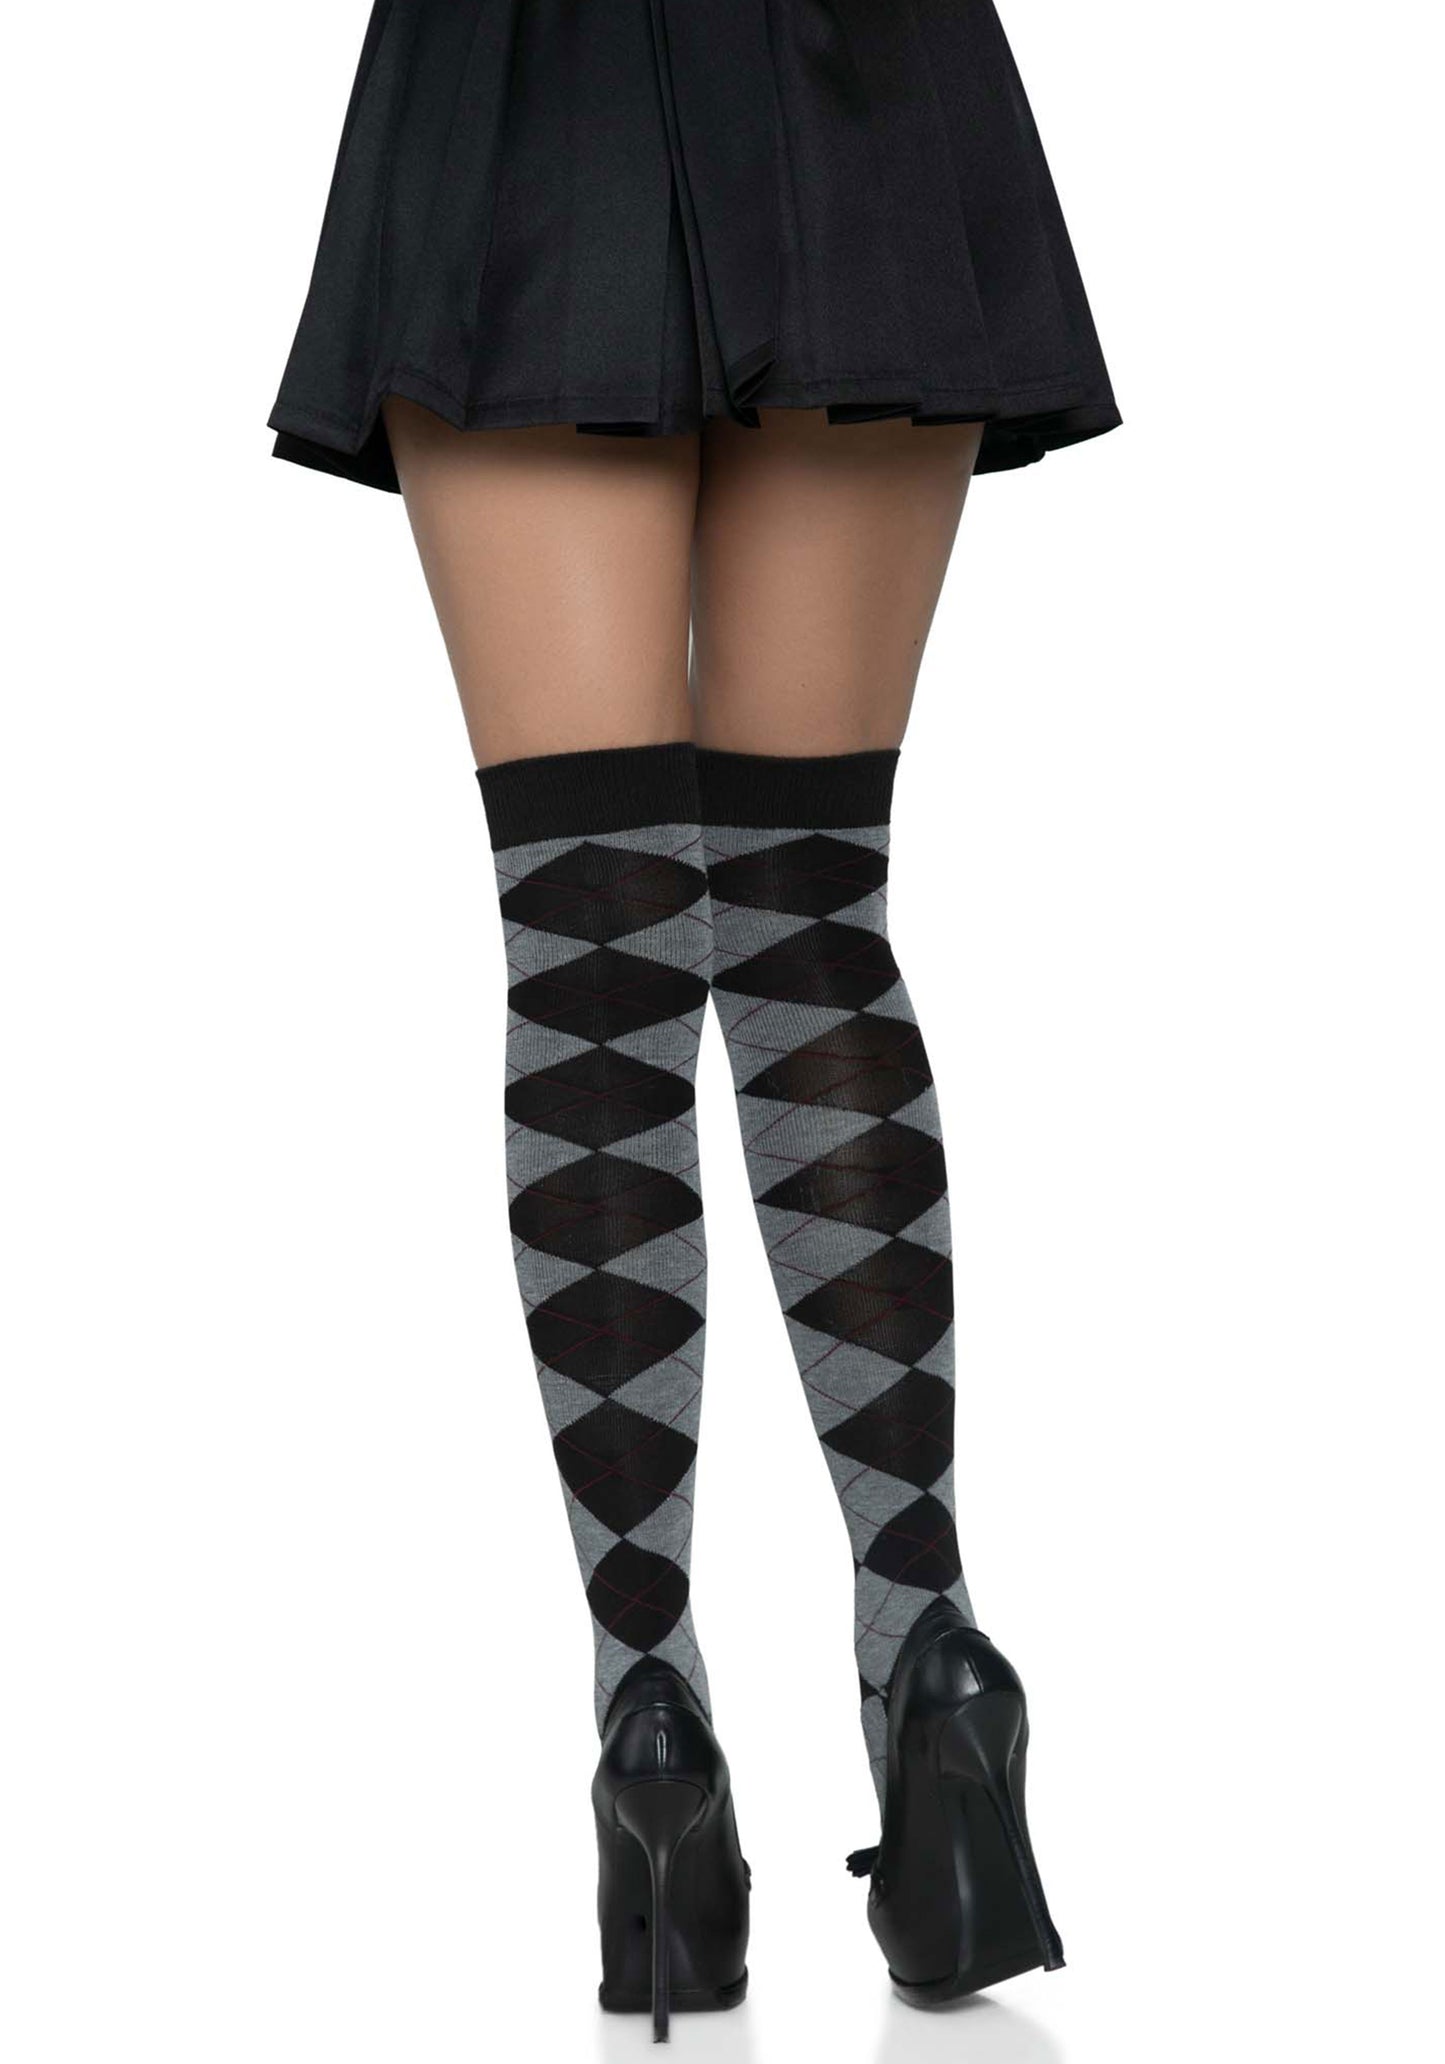 Leg Avenue Argyle Thigh Highs - Black and grey knitted argyle diamond golf style patterned over the knee socks.